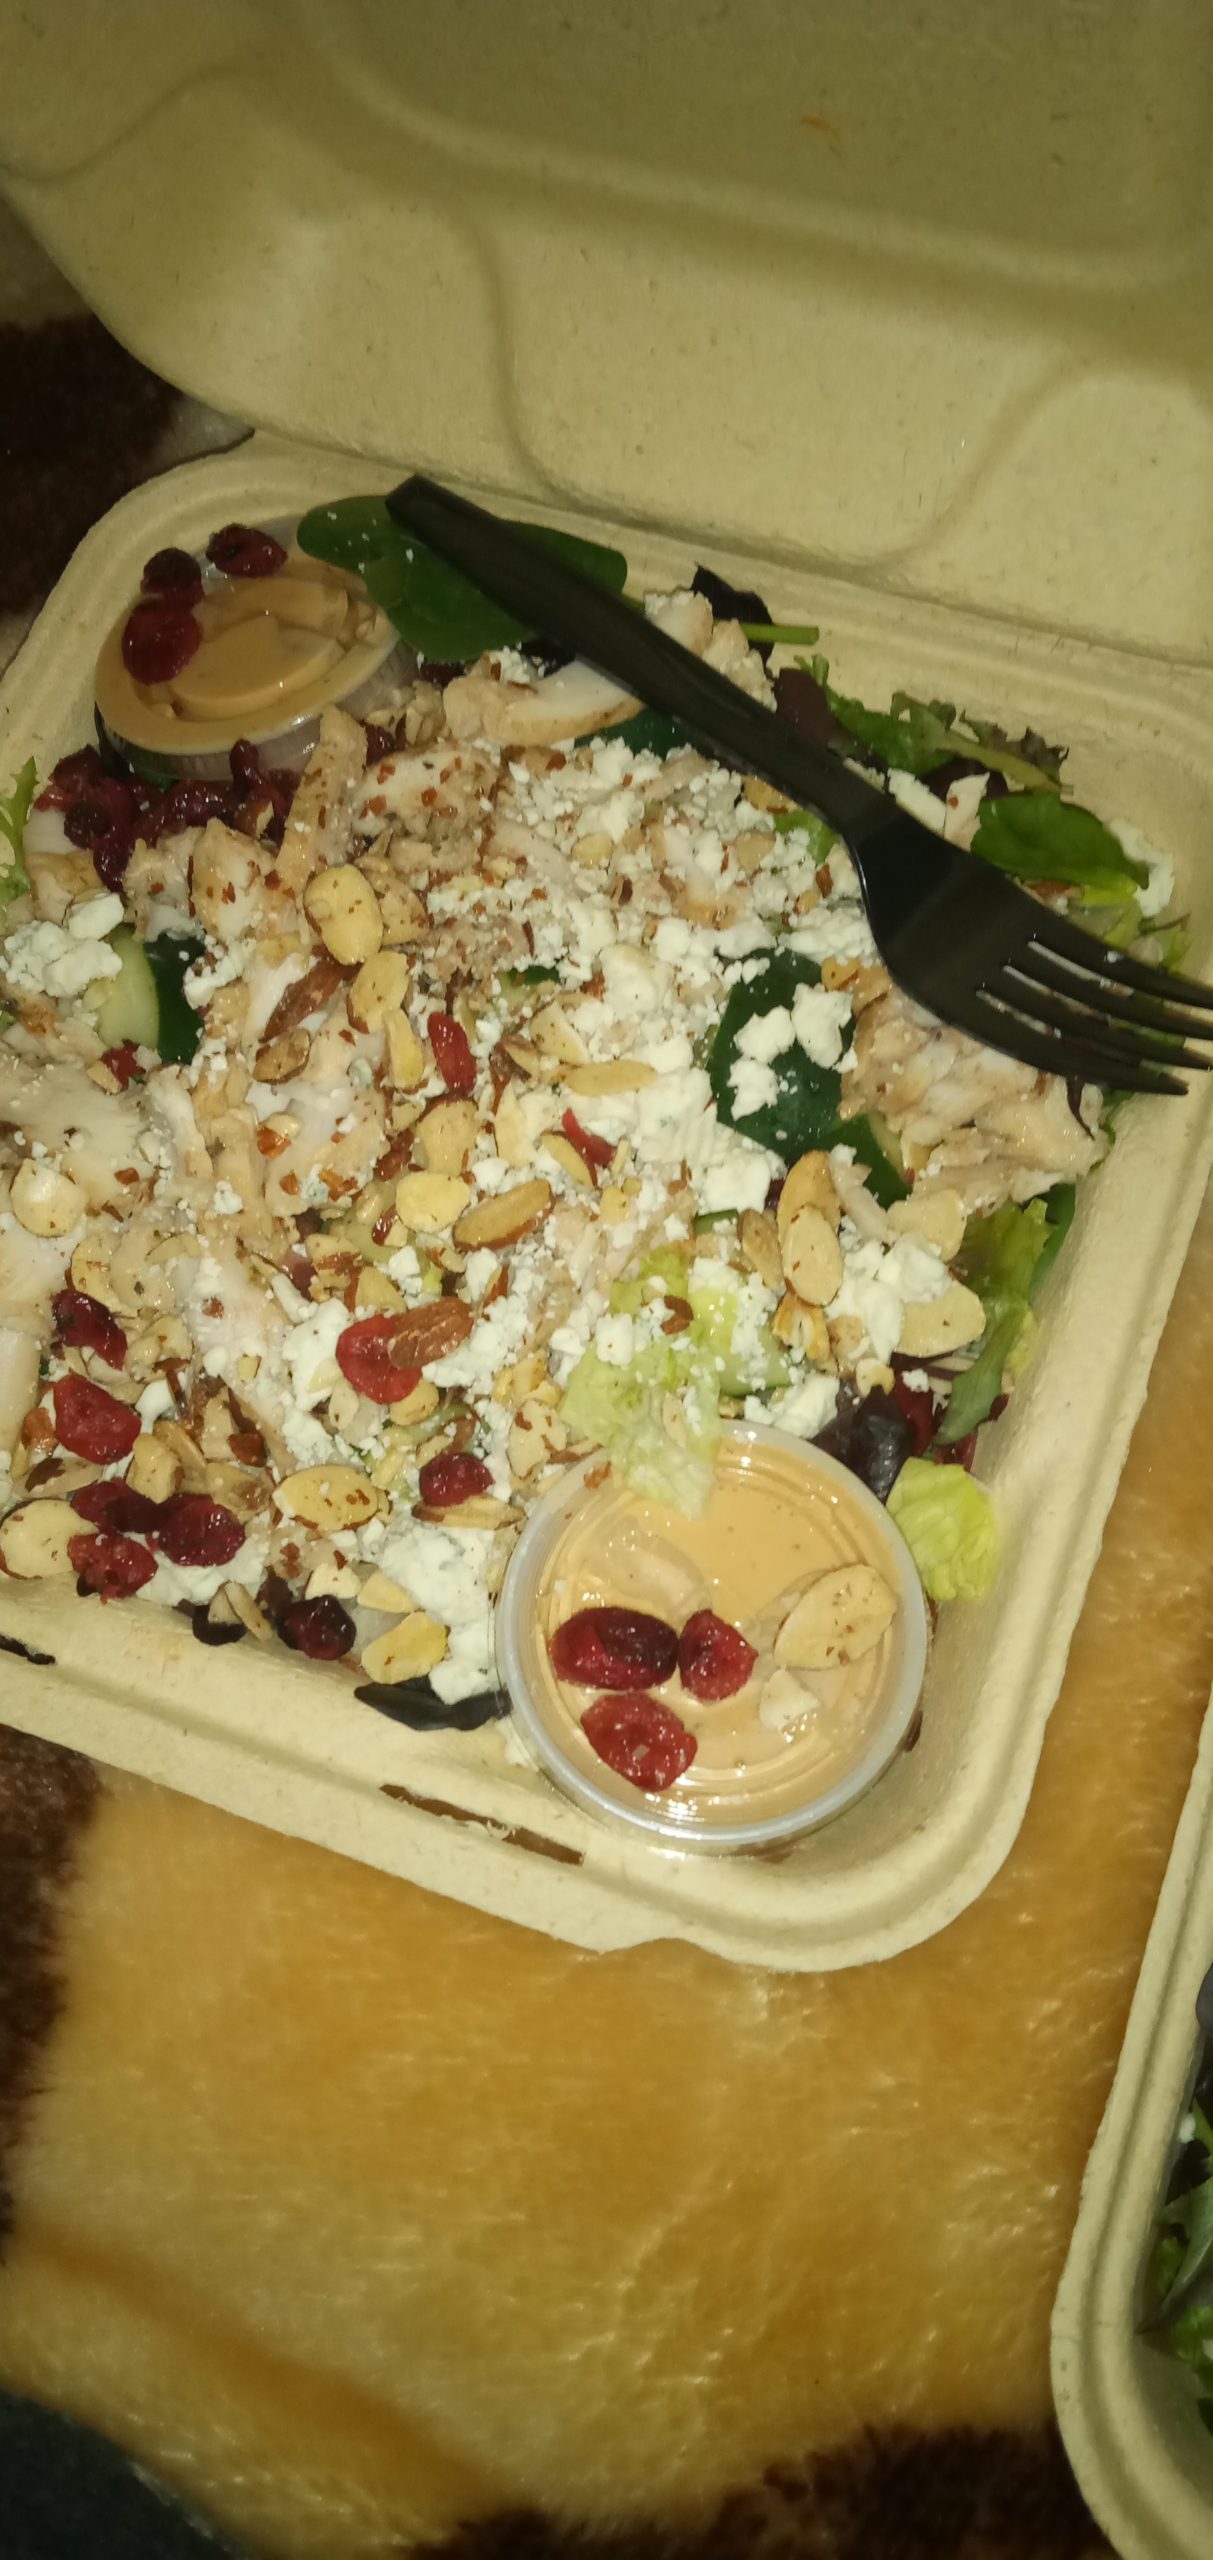 McAlisters Deli complaint Wrong food